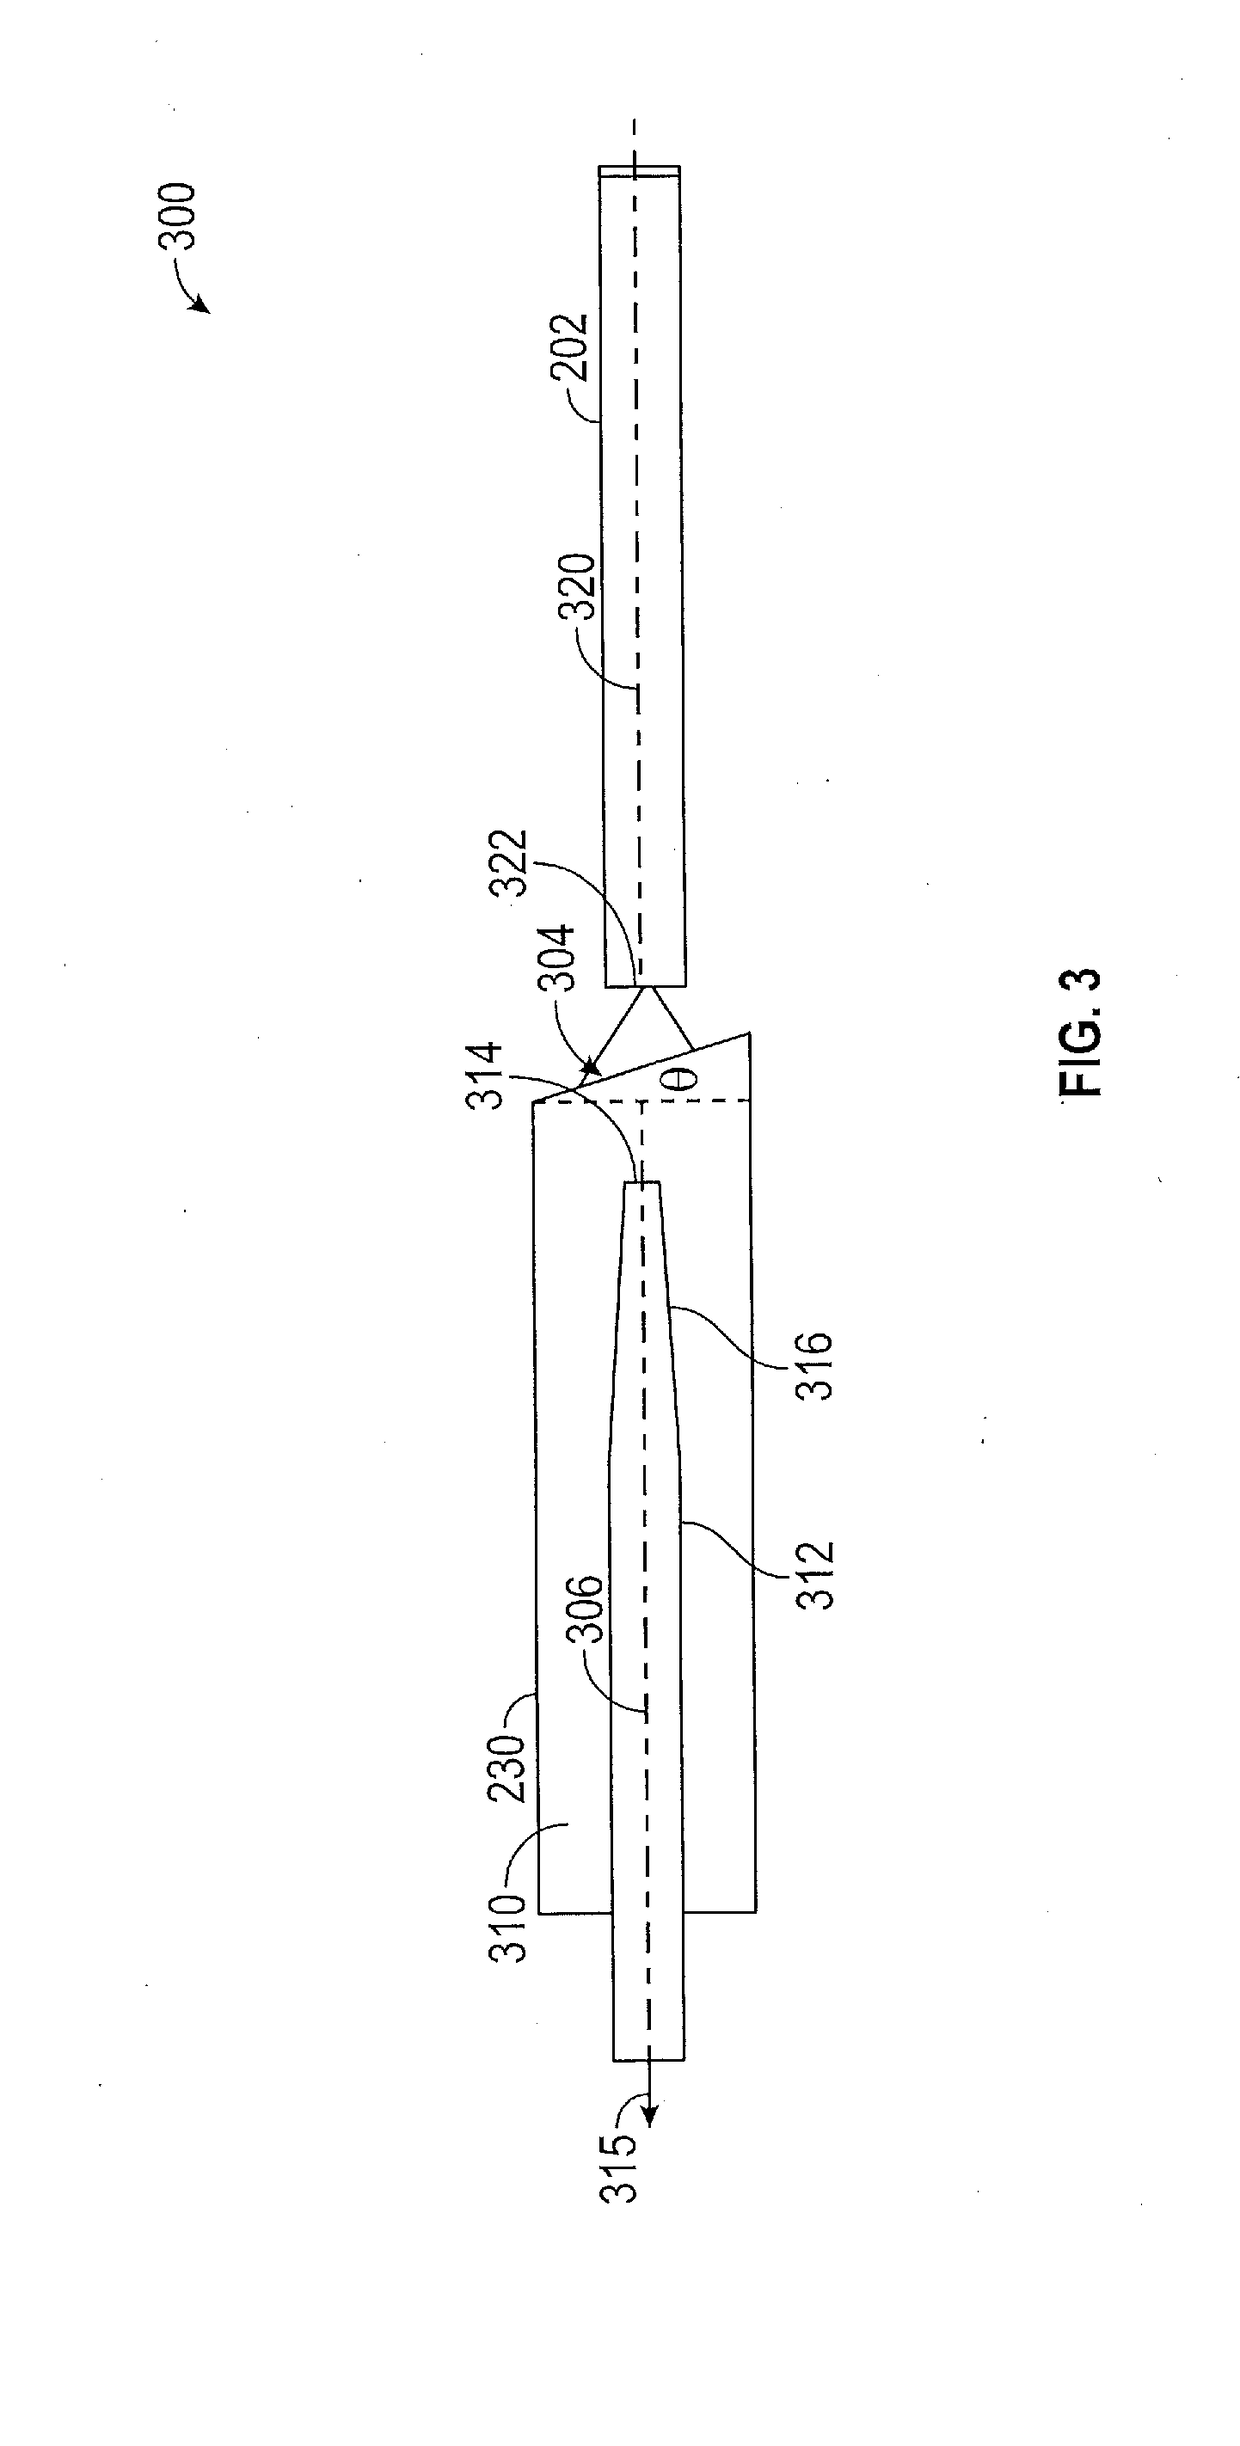 Photonic integrated circuit edge coupler structure with reduced reflection for integrated laser diodes